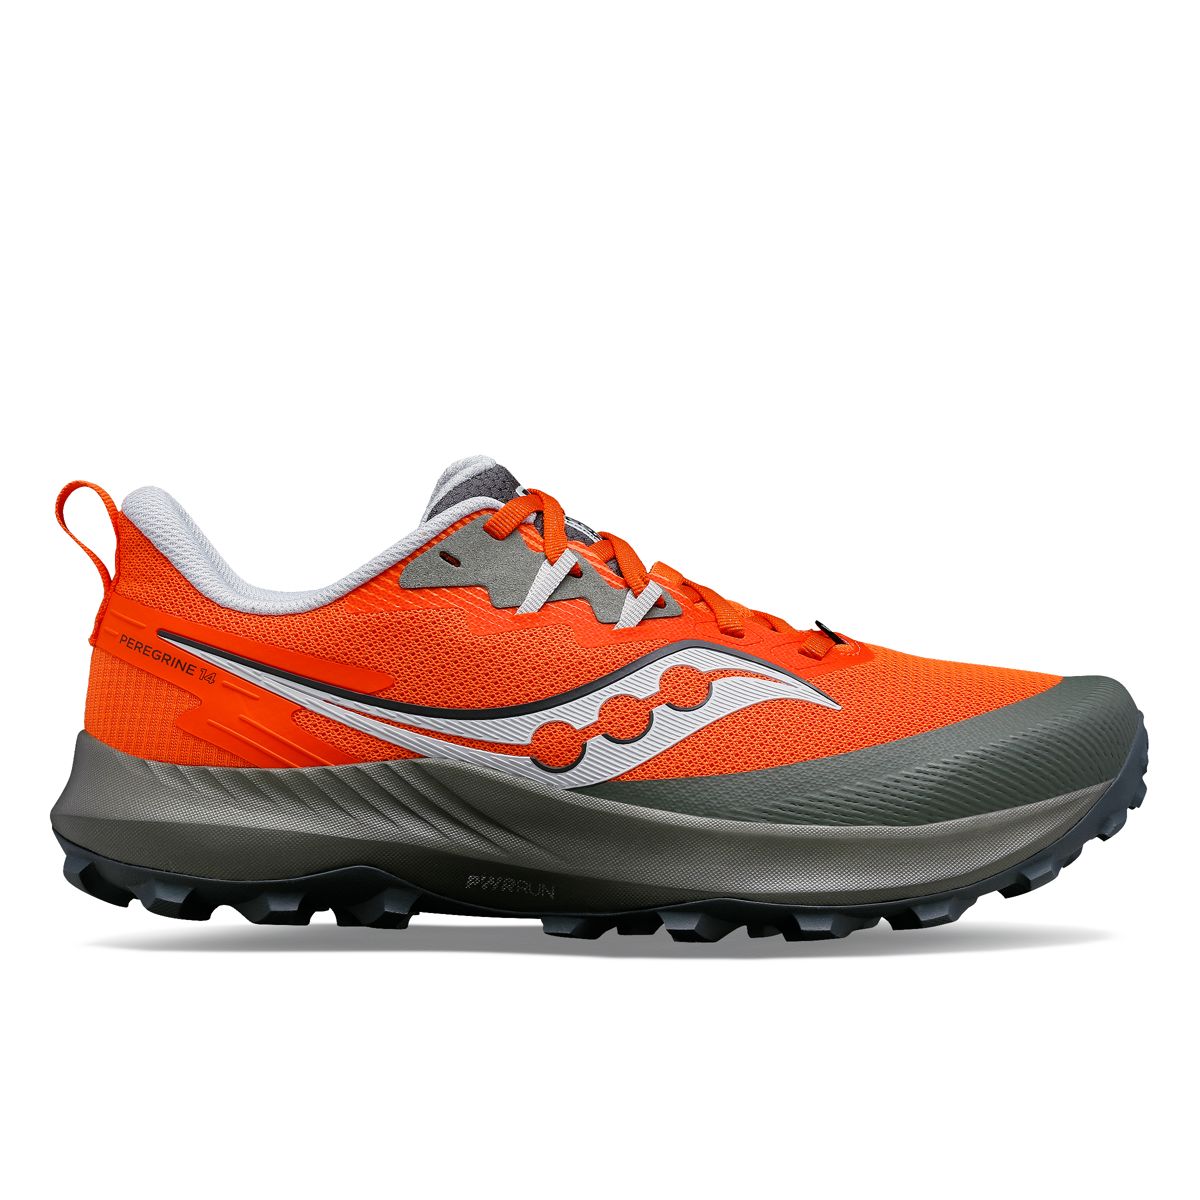 Men's Peregrine 14 Trail Running Shoes | Saucony